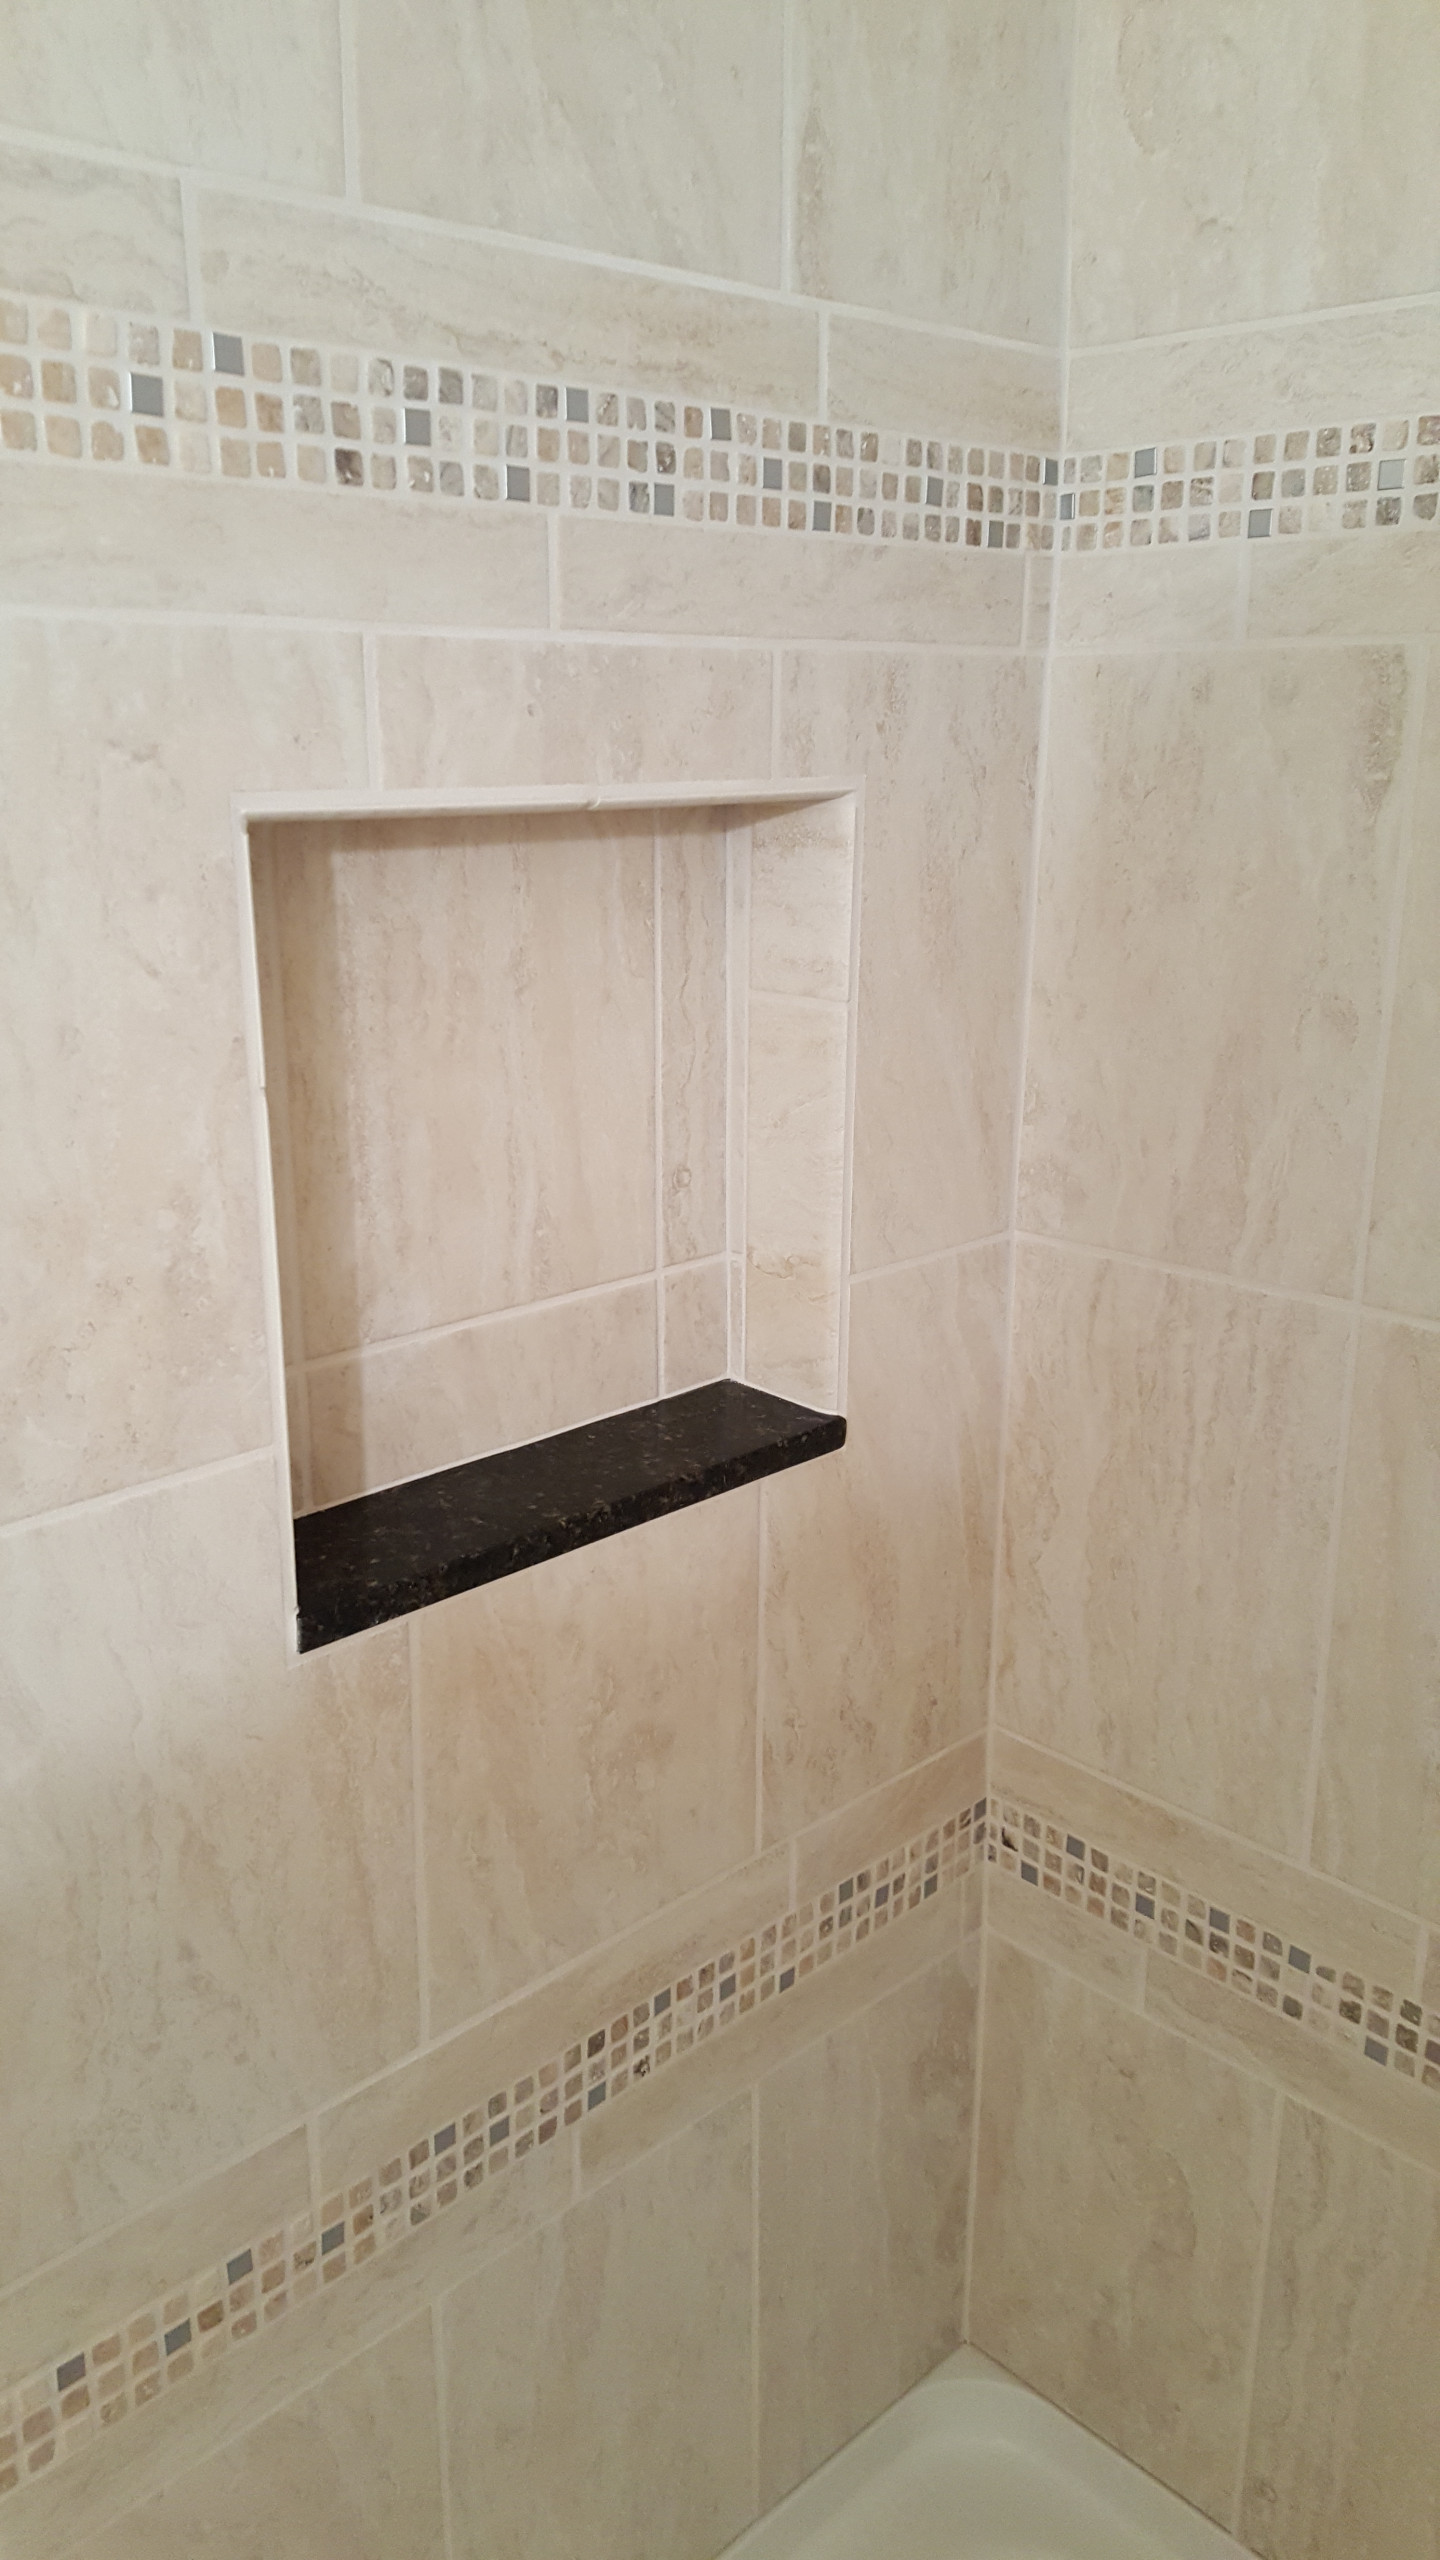 Shampoo shelf with granite sill that will match vanity top